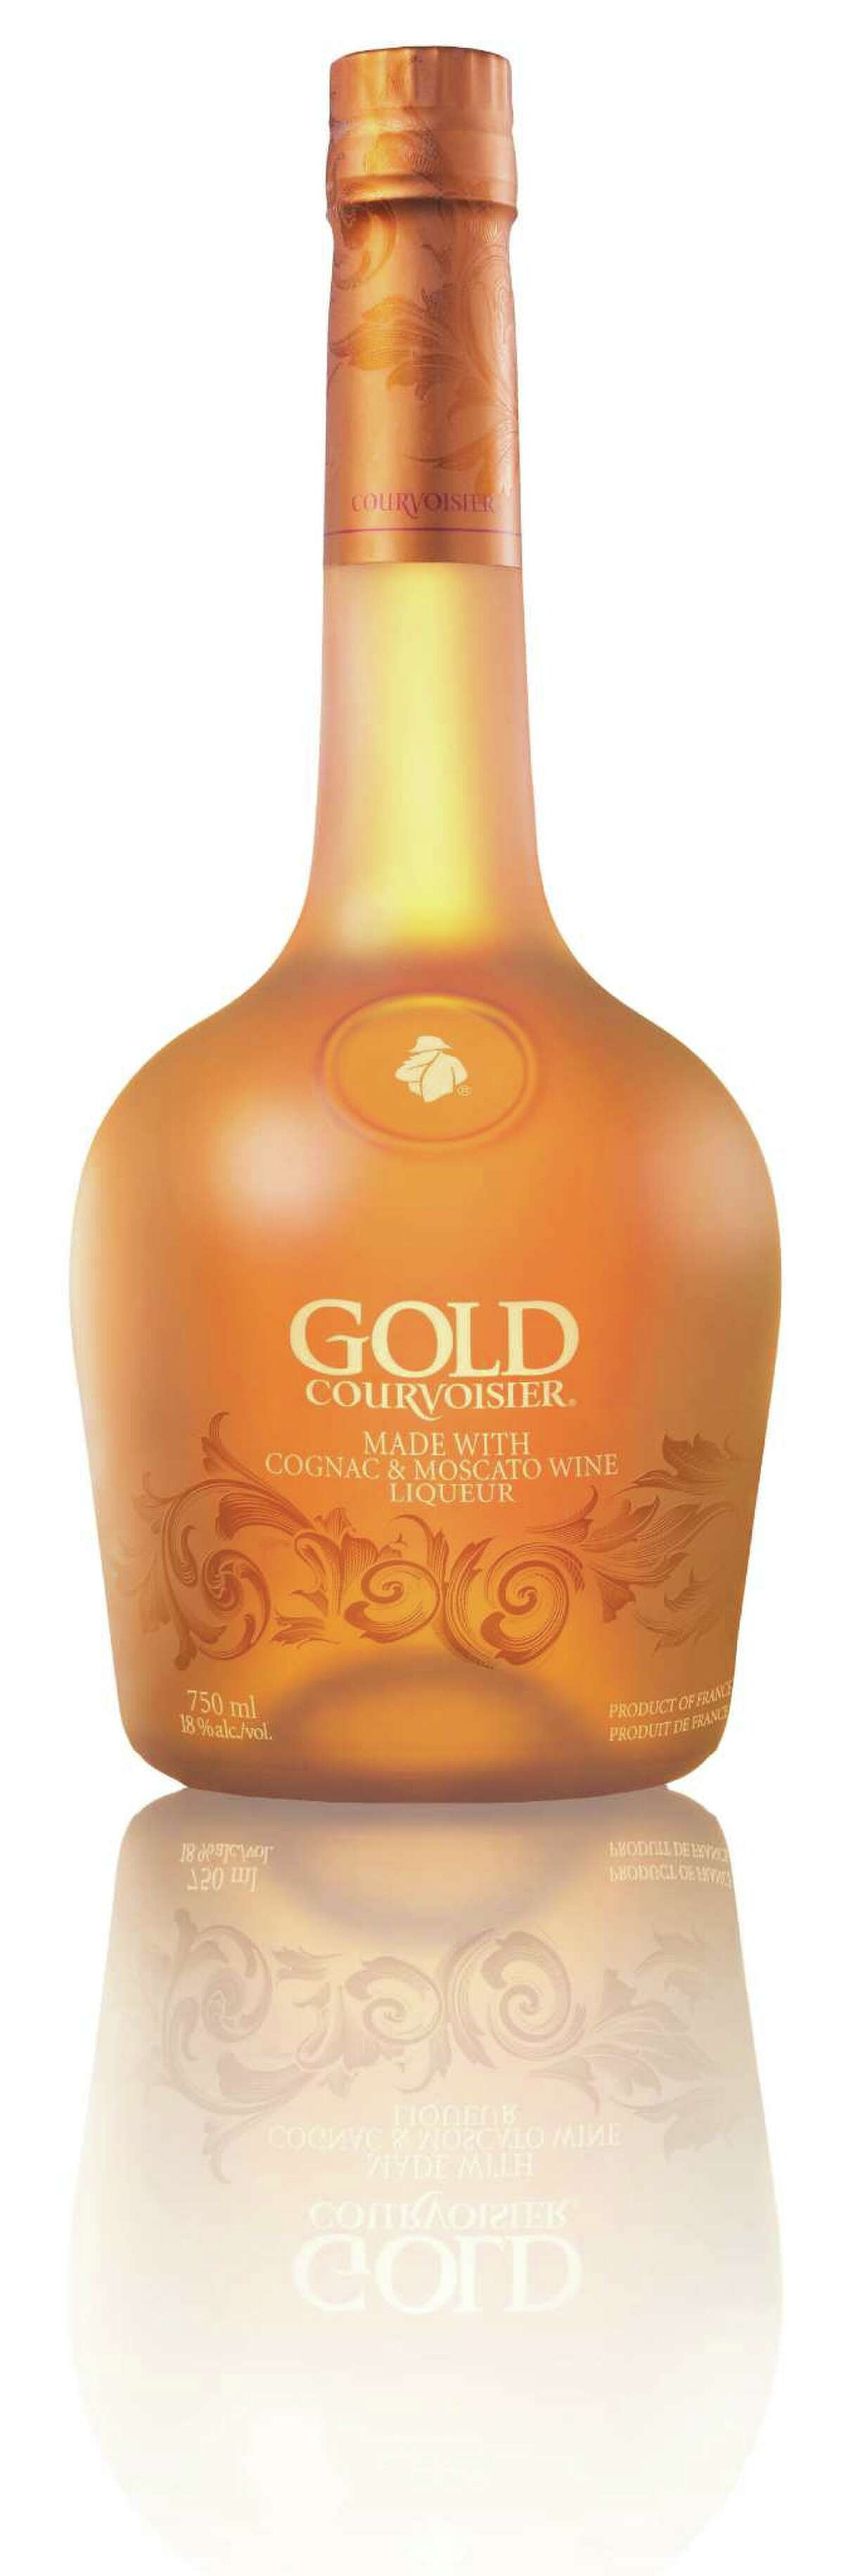 This undated publicity image provided by Beam, Inc. shows CourvoisierAE Gold liqueur. (AP Photo/Beam, Inc.)